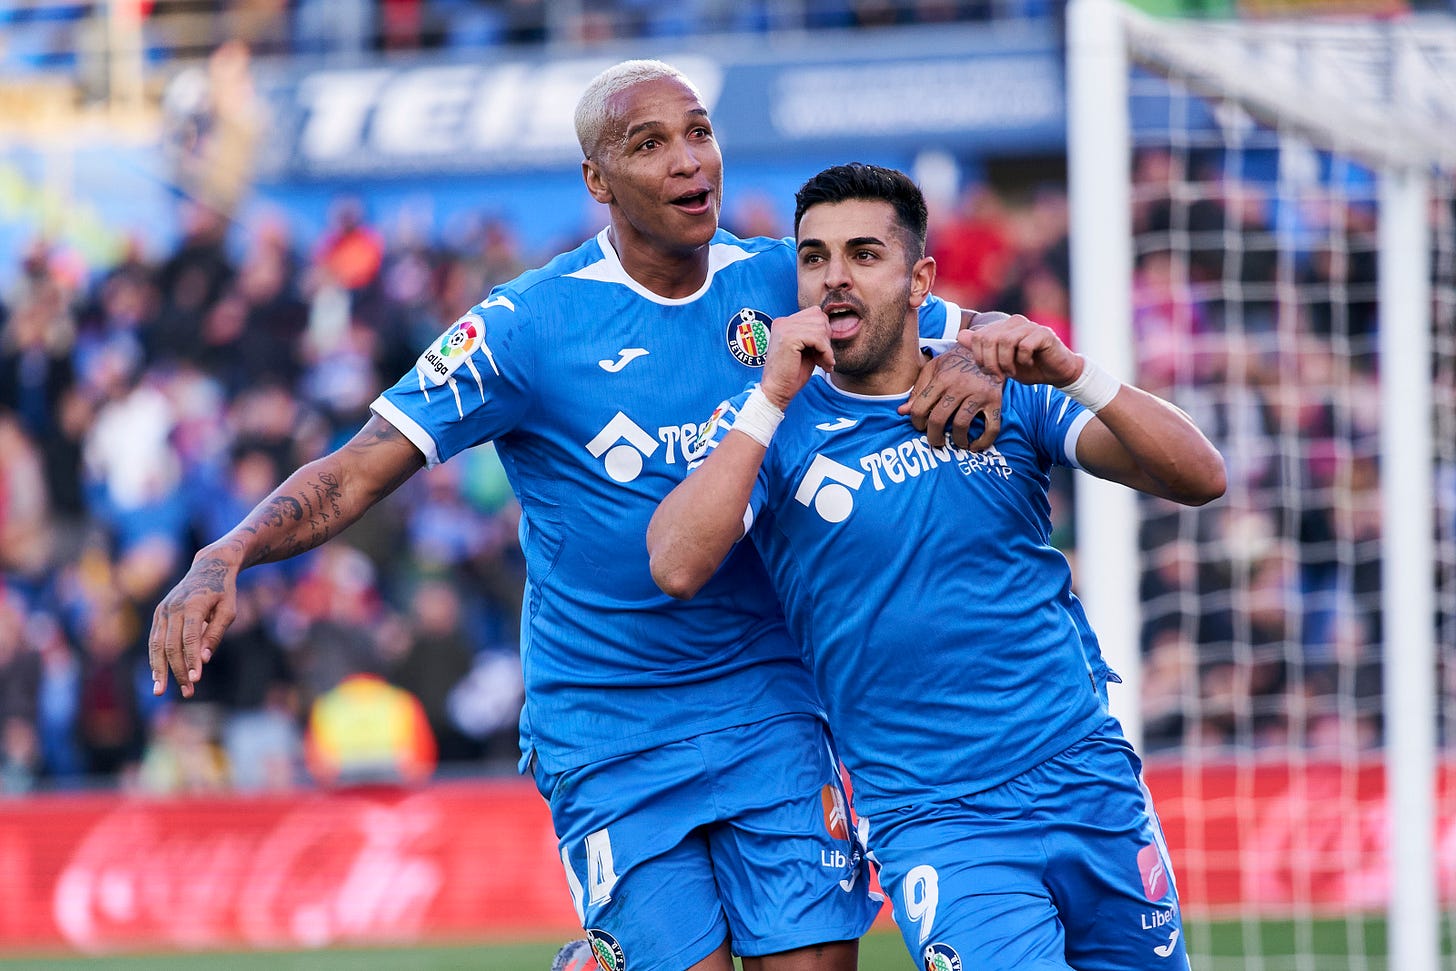 Could Getafe have a second straight Champions League push in store?